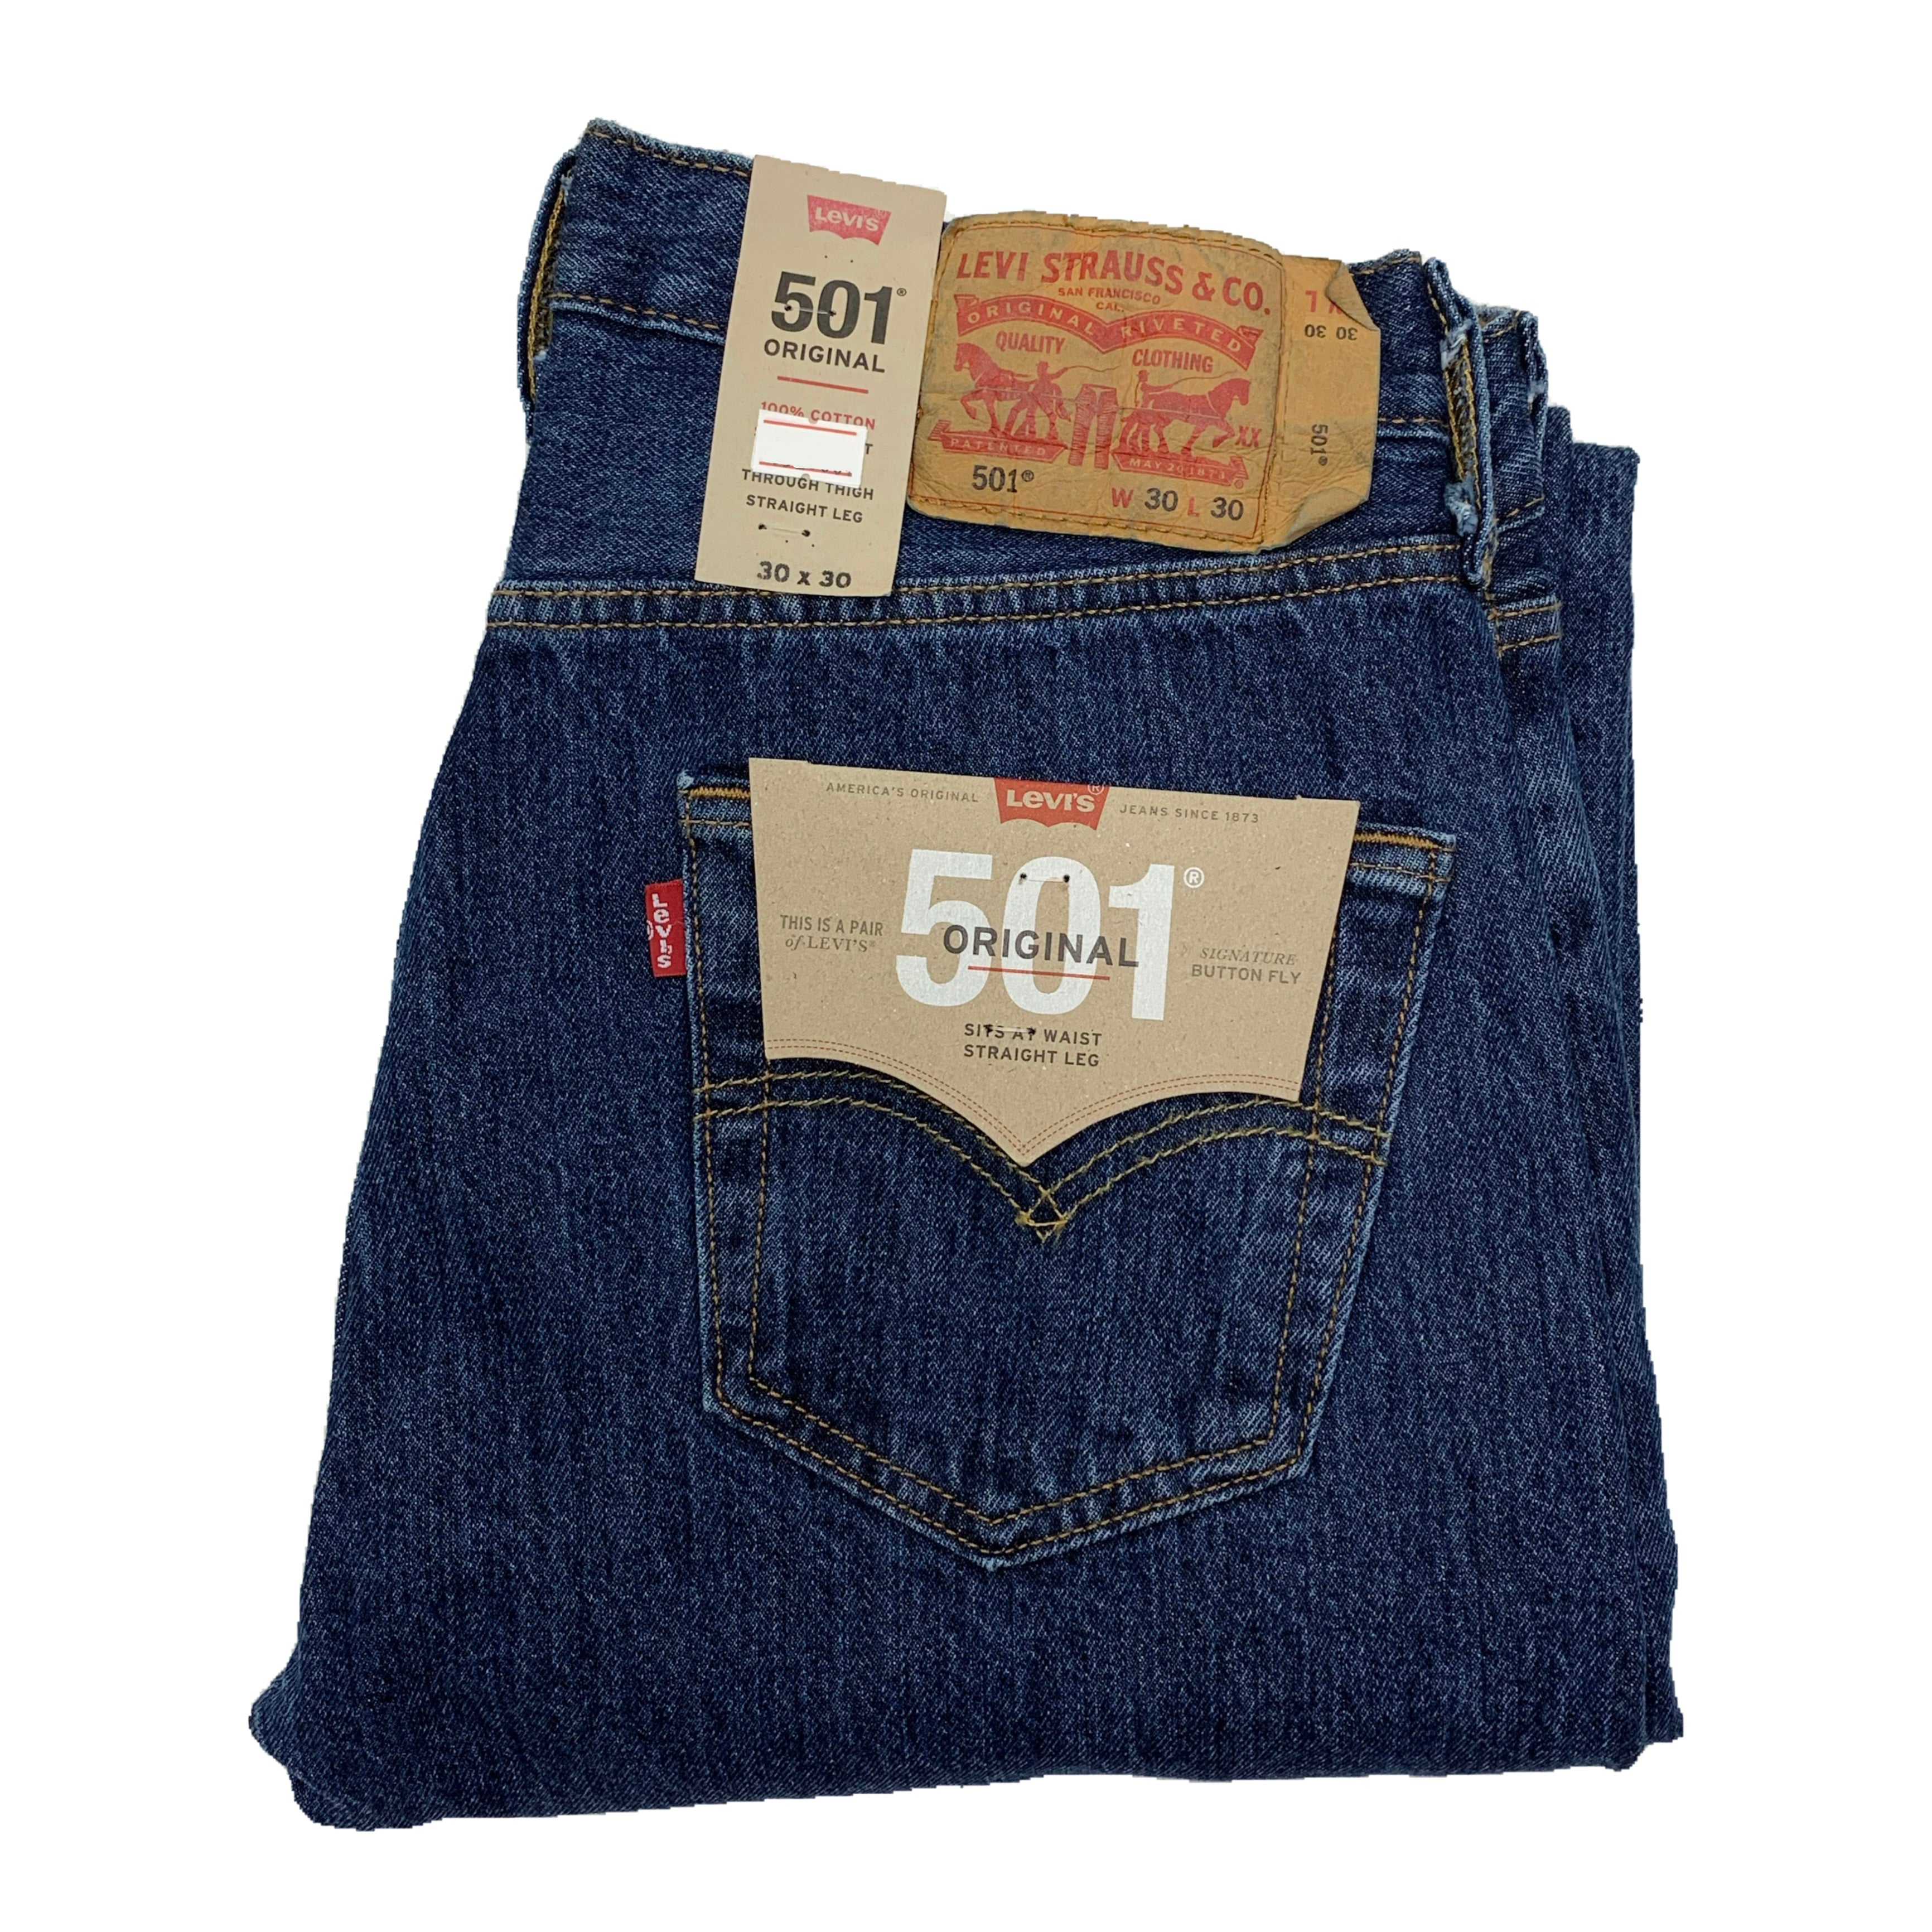 Levi's 501 Shrink-to-Fit (Size 46 - 50)